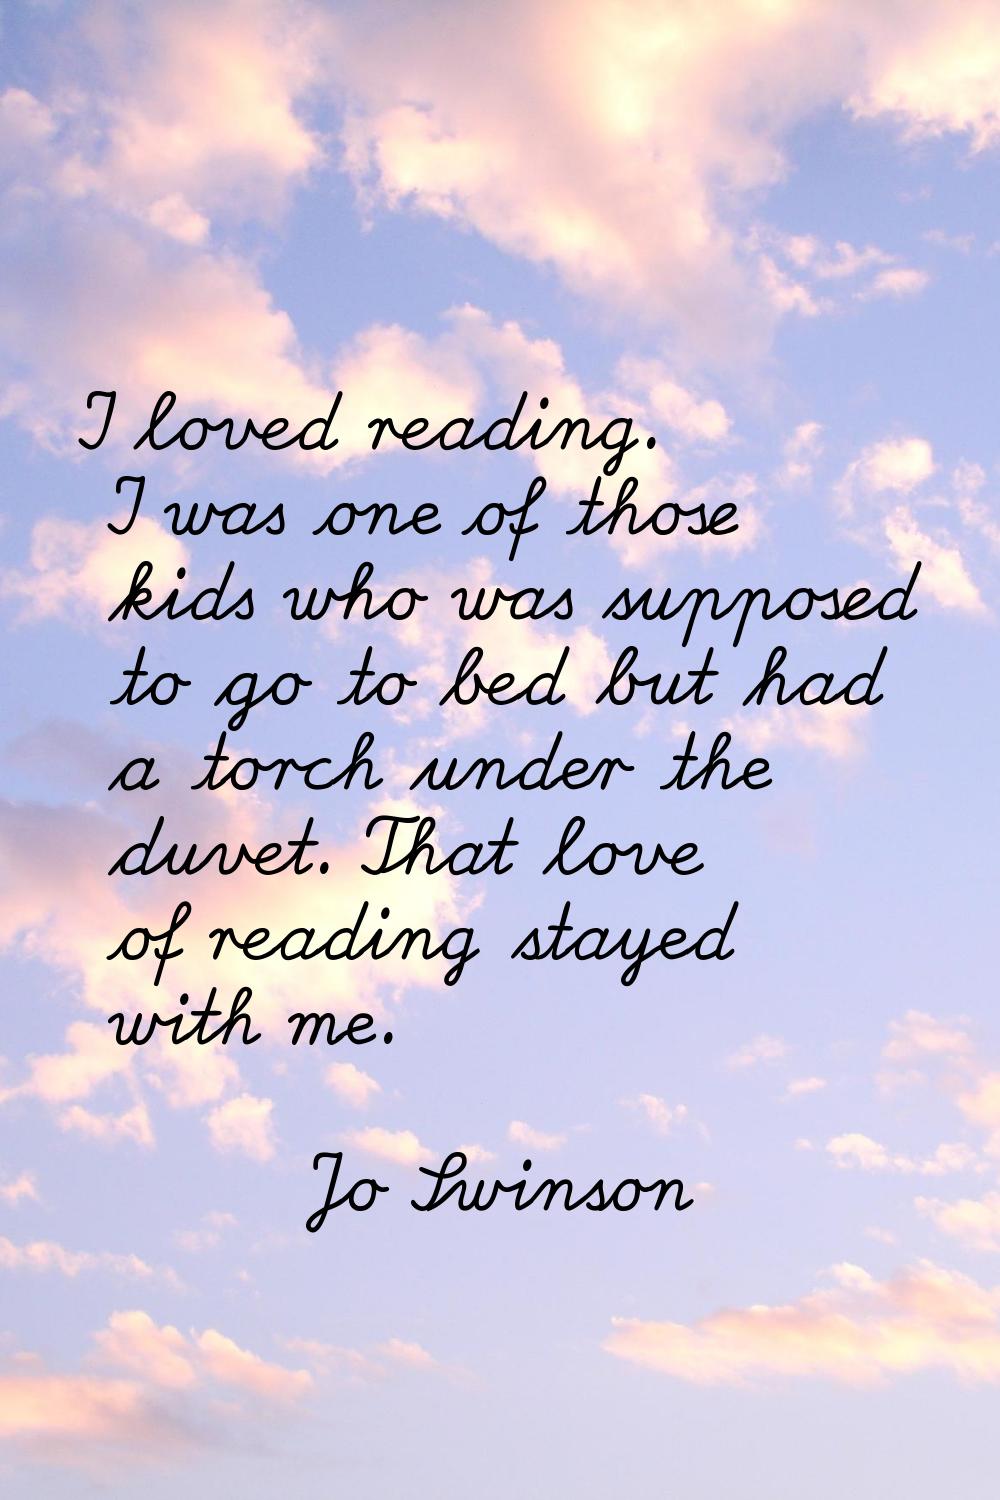 I loved reading. I was one of those kids who was supposed to go to bed but had a torch under the du